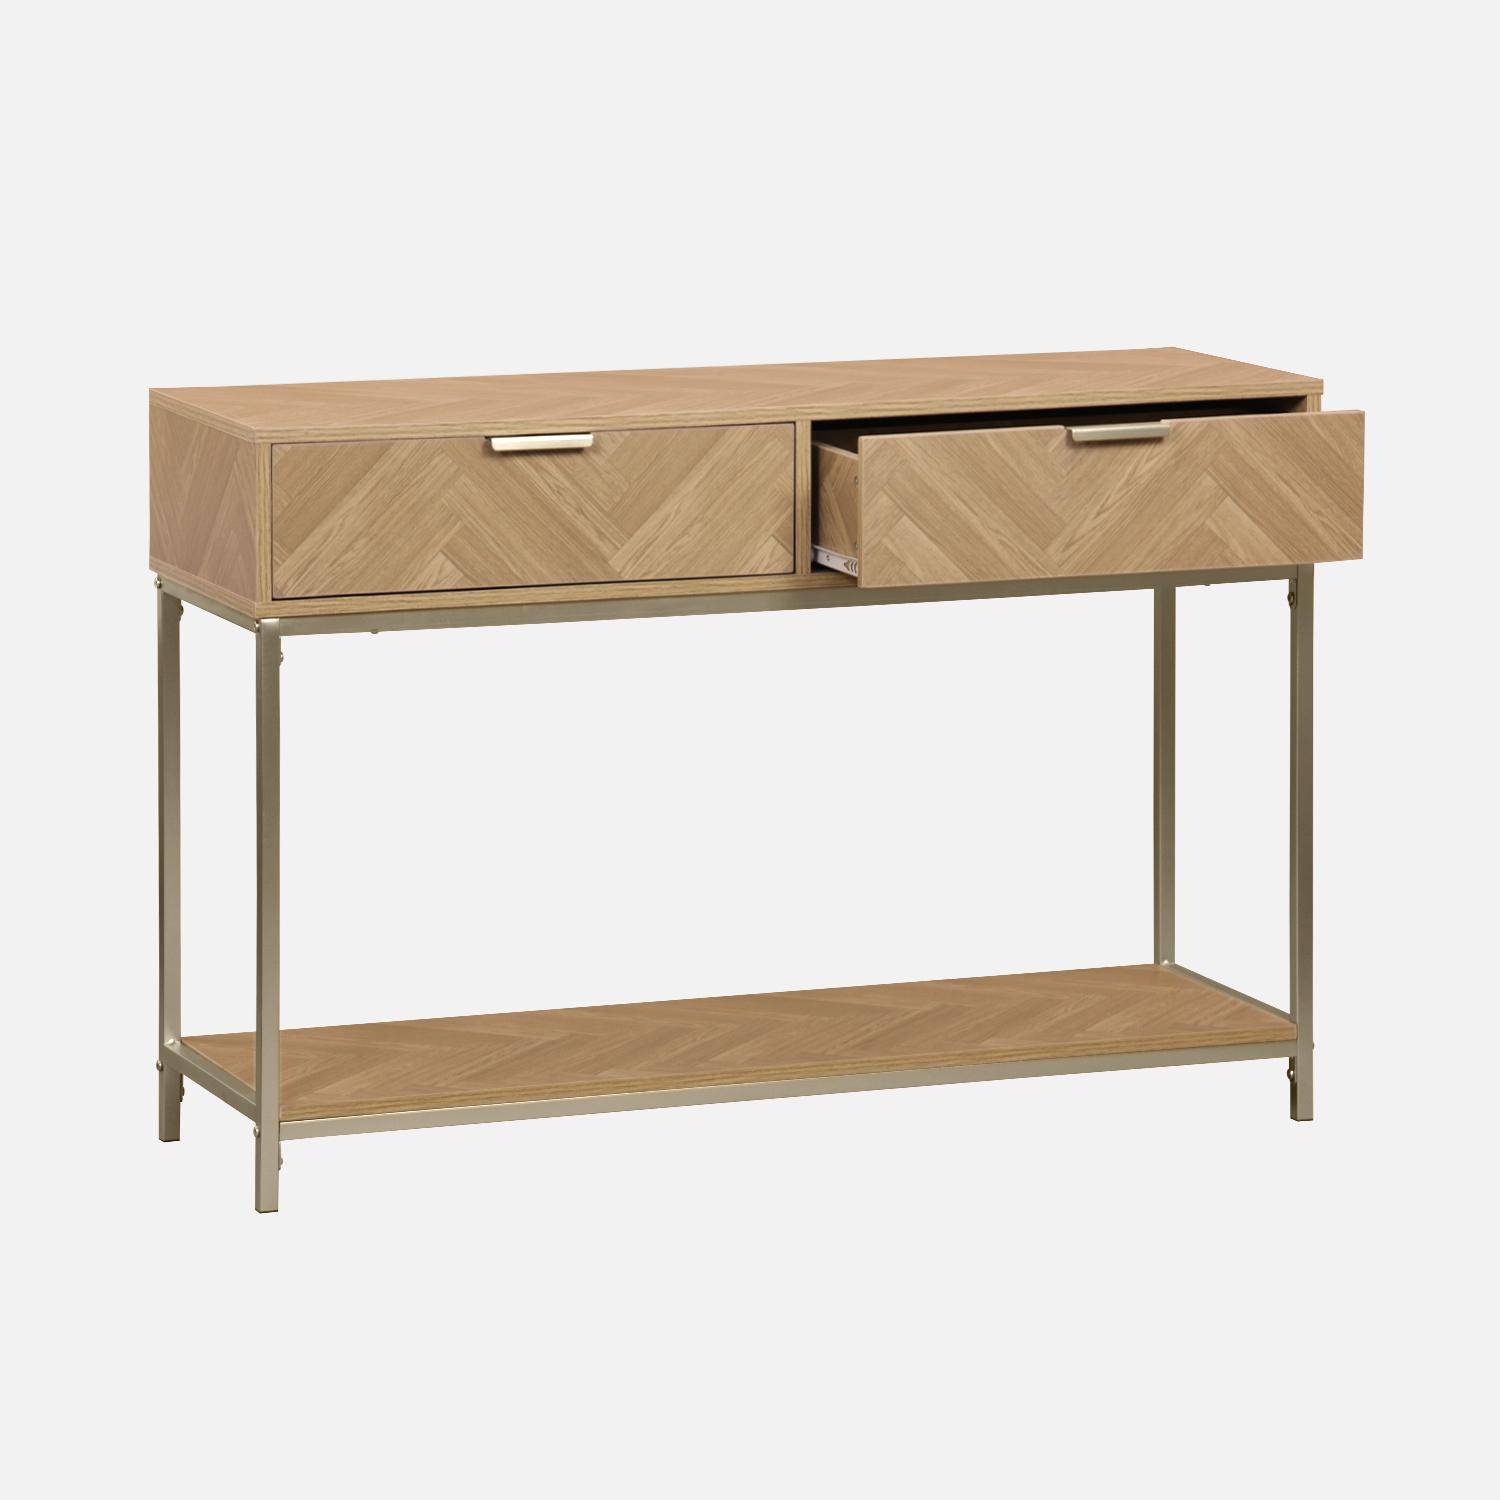 Herringbone hallway console table with 2 drawers, 110x35x75cm - Budapest - Natural,sweeek,Photo6